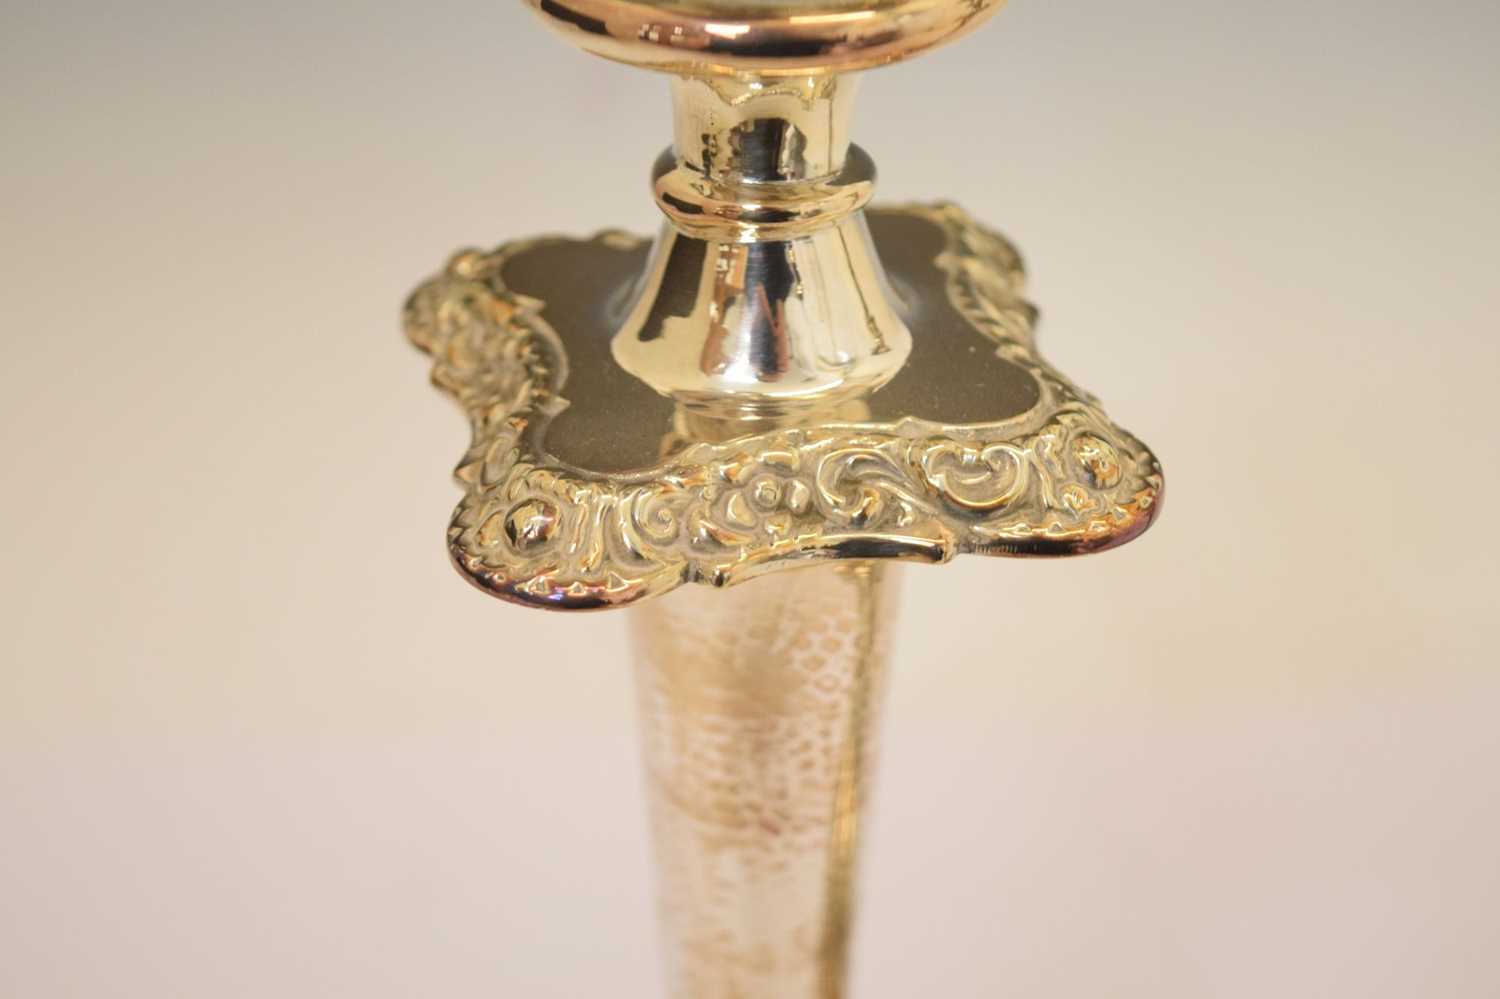 Pair of 19th century silver plated on copper candlesticks - Image 6 of 8